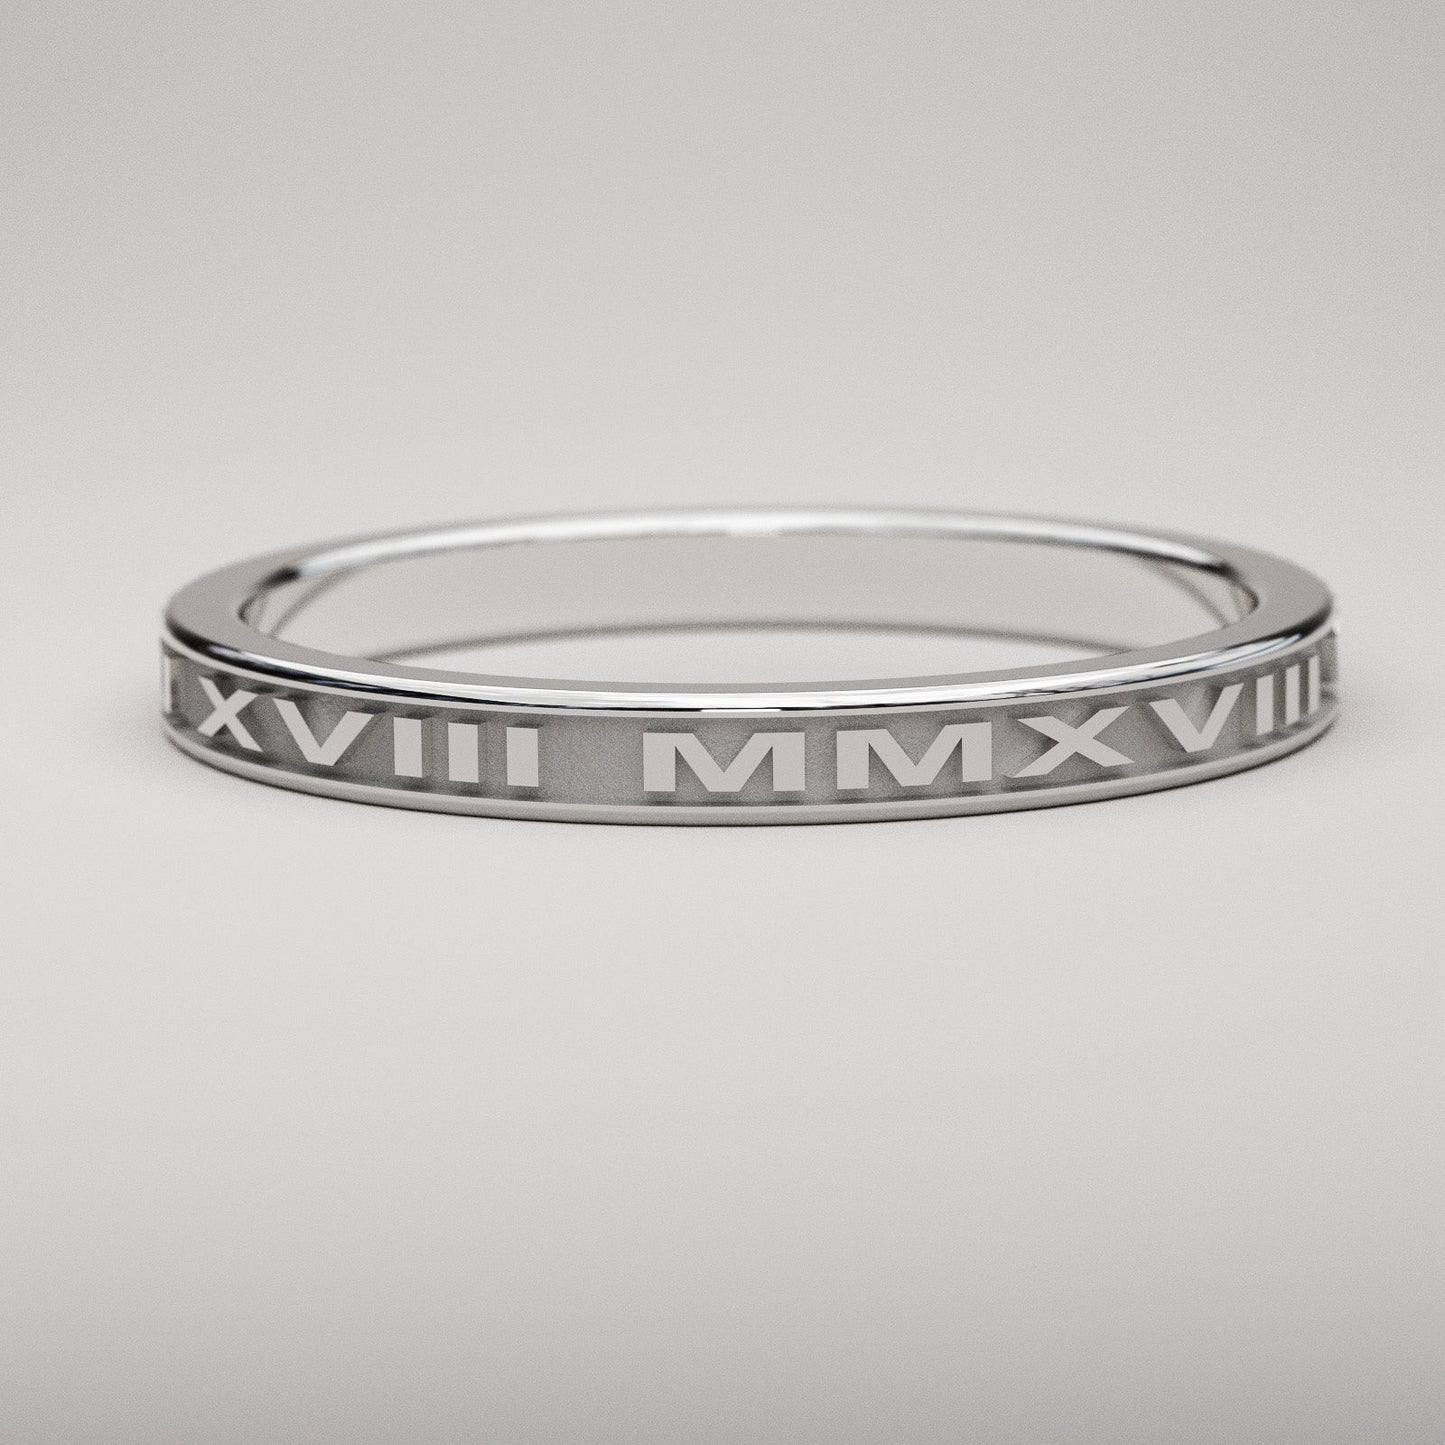 Custom date ring in 14k white gold featuring your date in Roman Numerals